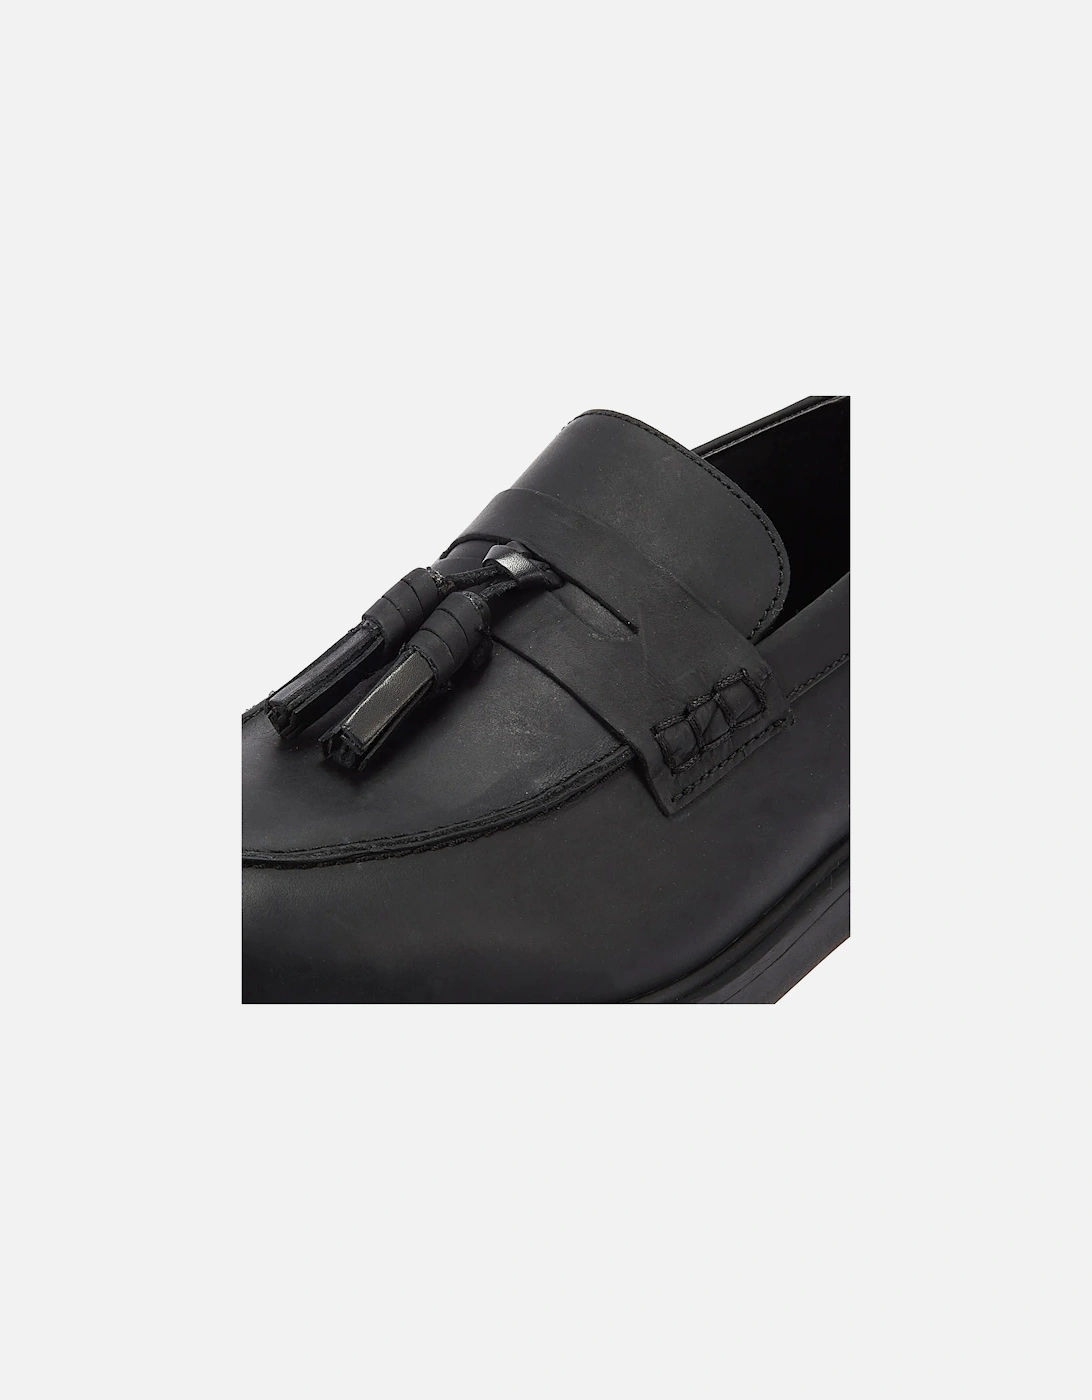 Cato Loafer Crazy Leather Men's Black Loafers